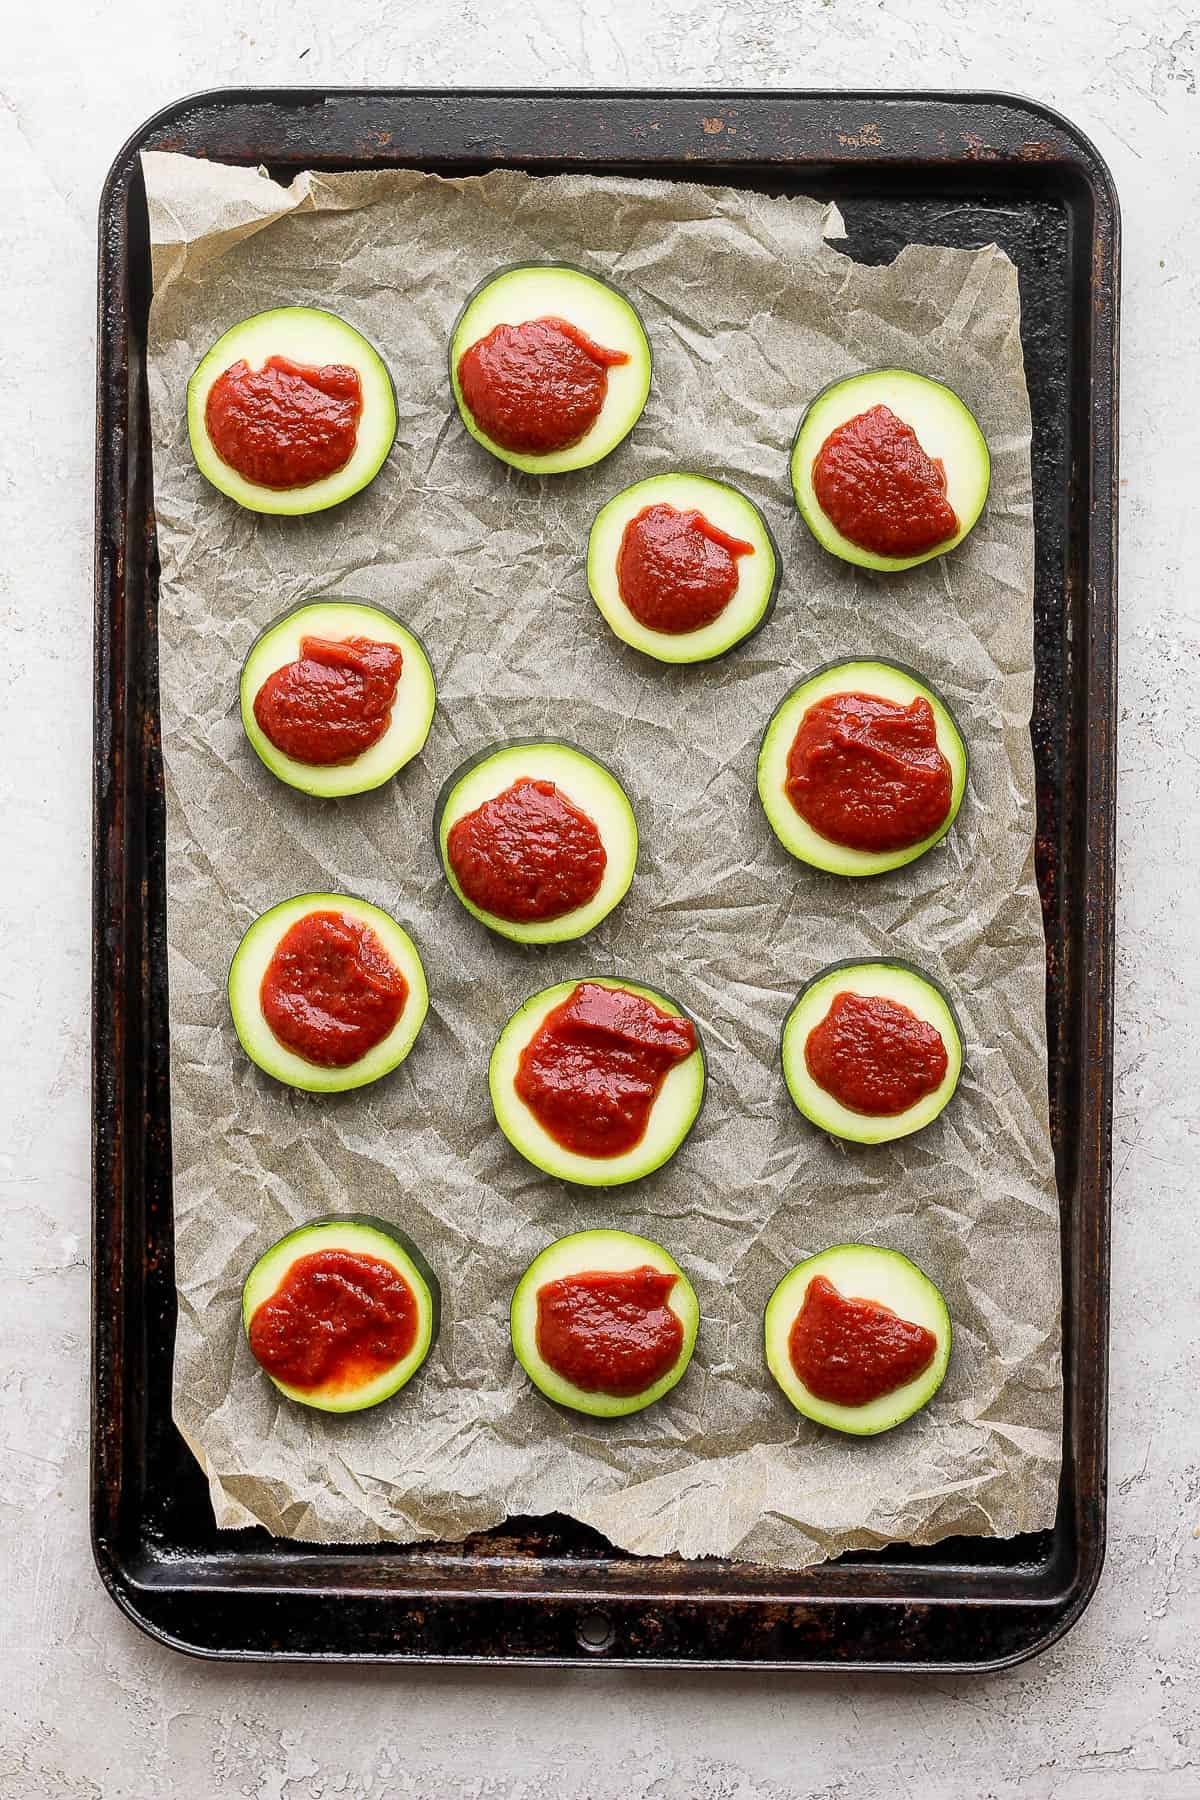 Sliced of zucchini with pizza sauce on top on a parchment lined baking sheet.